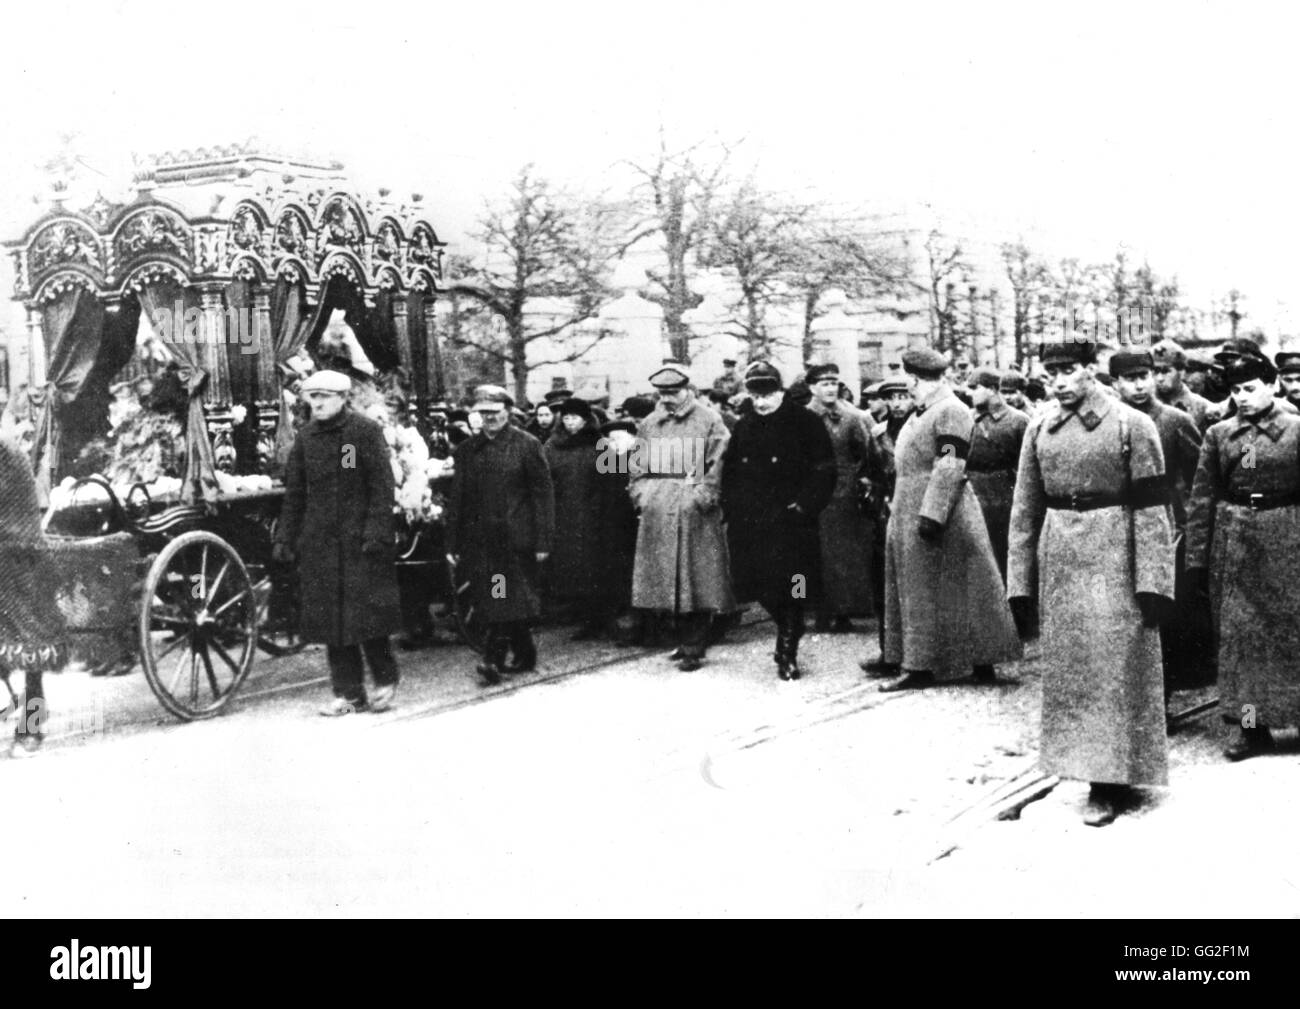 Nadia's funeral (Stalin's wife), which the latter will not attend. Behind, his son Basile. On his left, Nadia's brother-in-law, Redenss, and the godfather Lehoukidze. 20th century U.S.S.R. Stock Photo